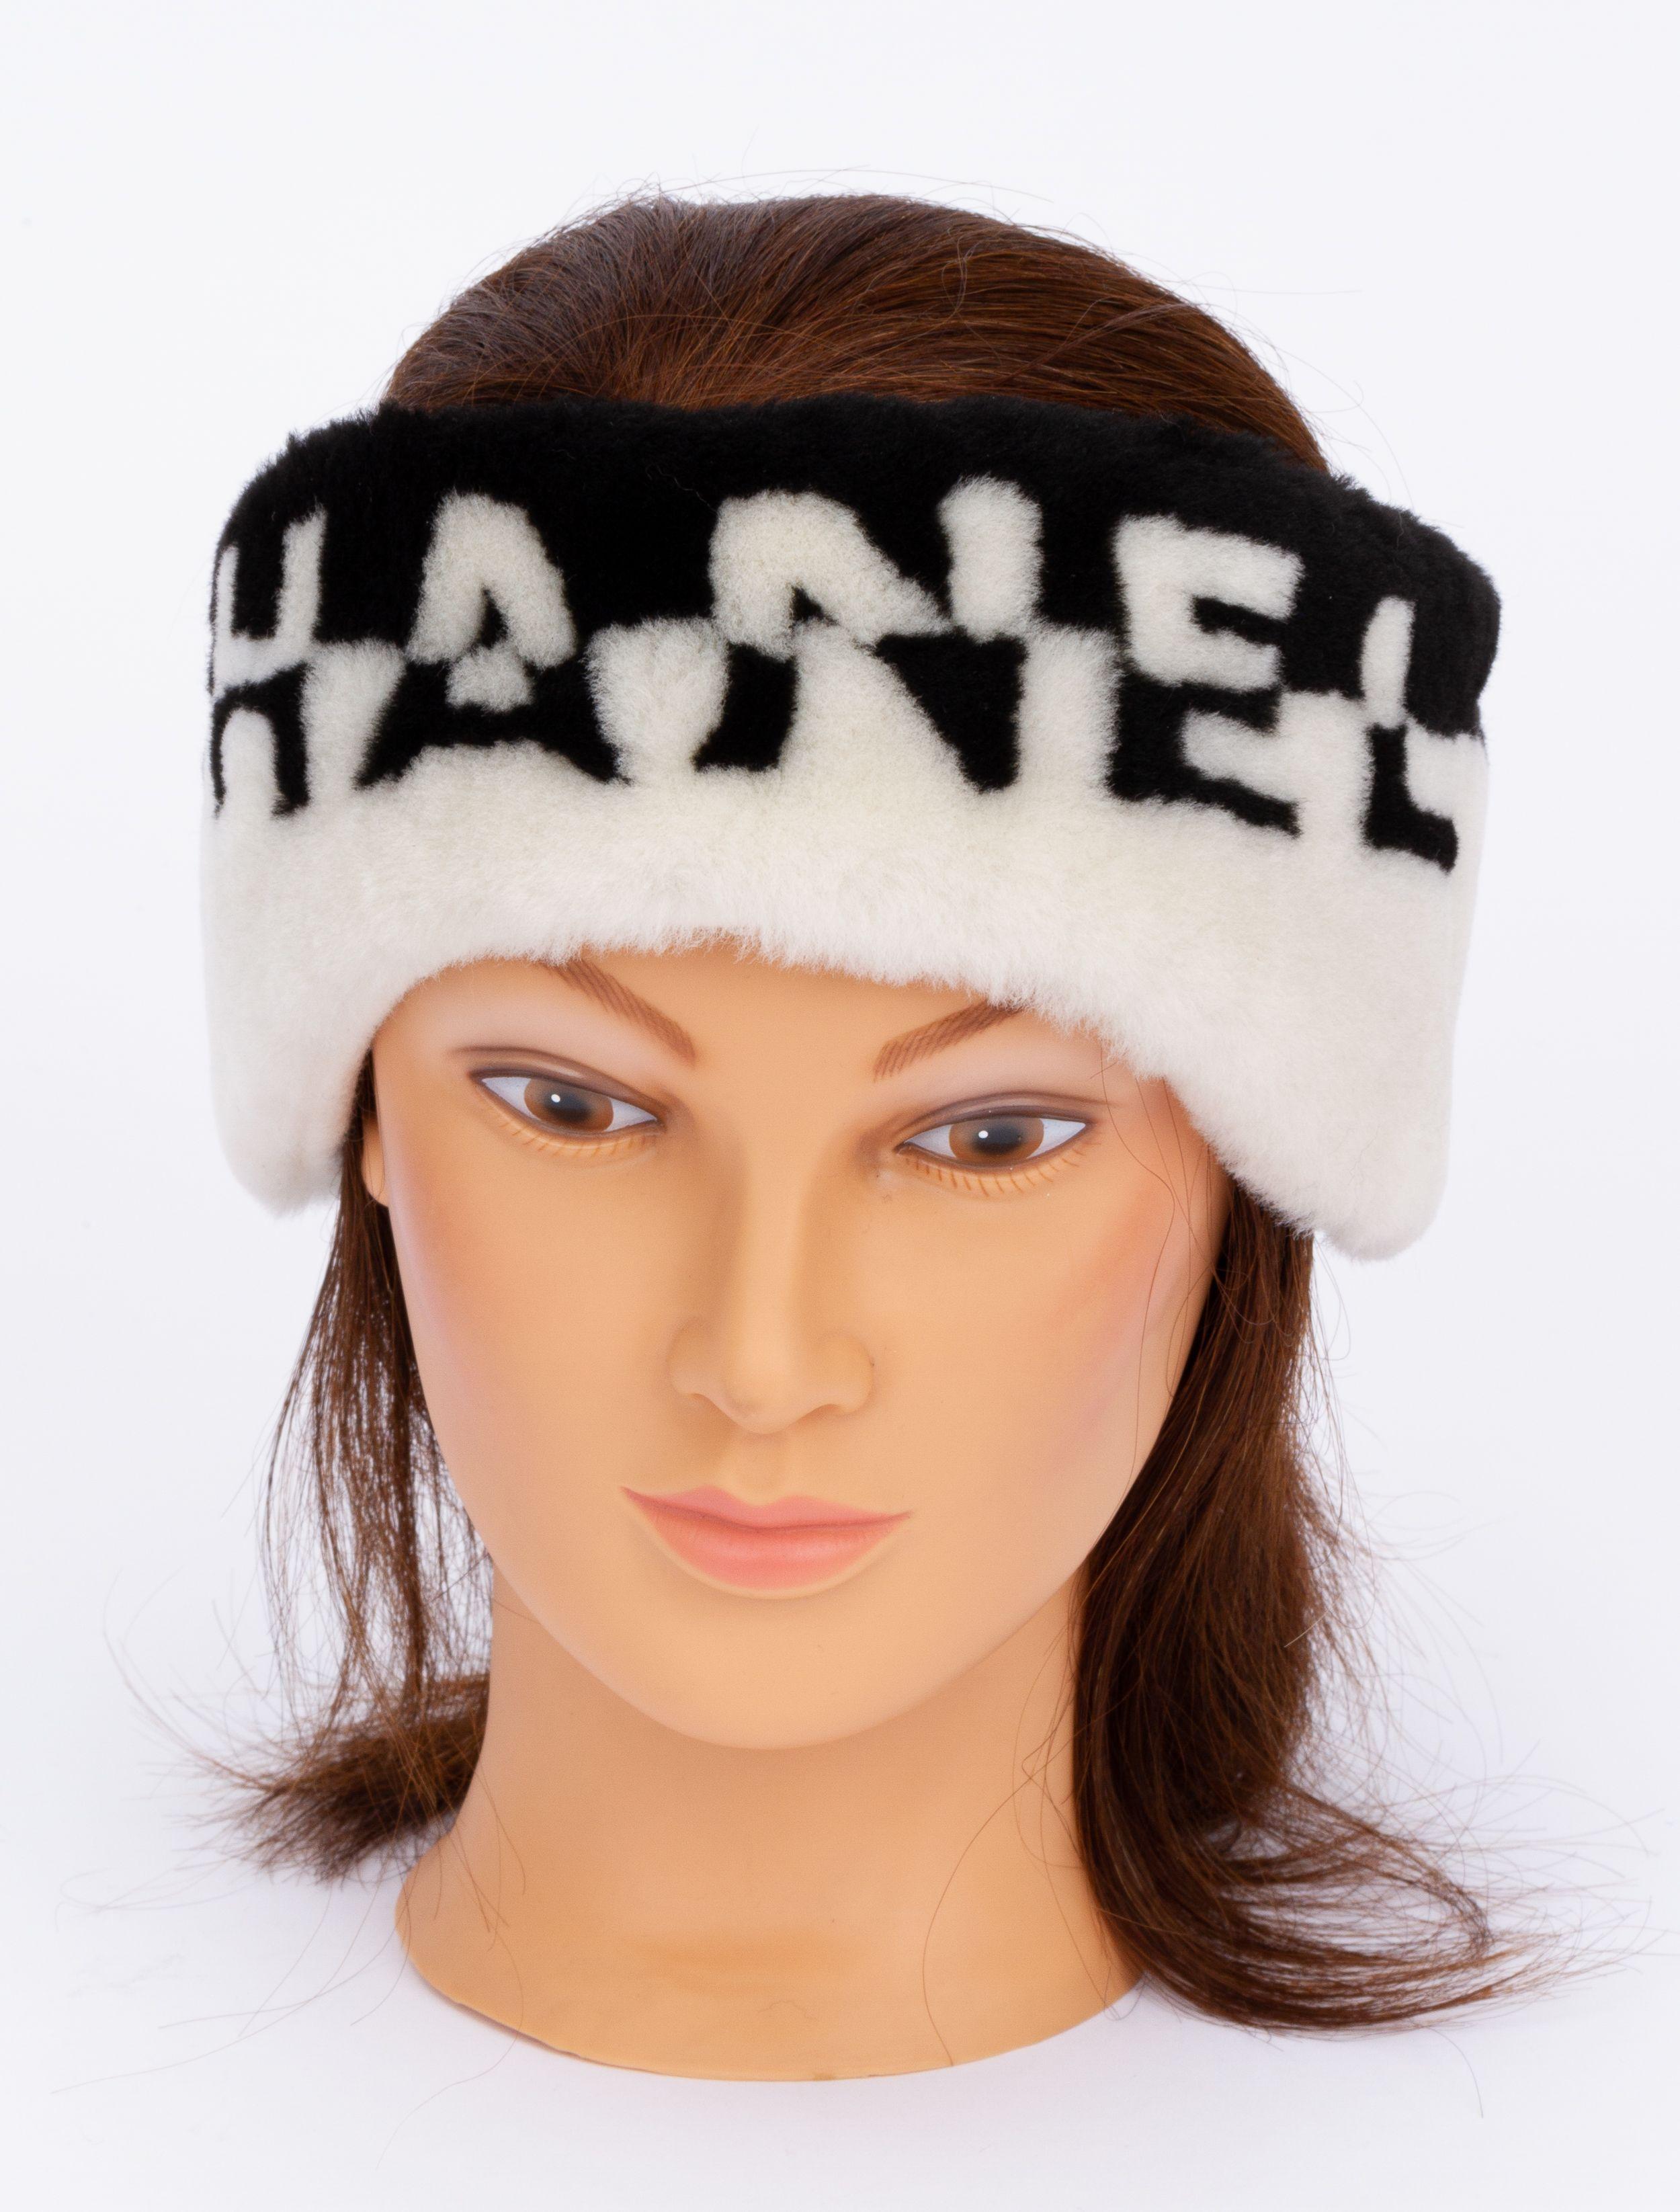 Black and white Chanel Headband made out of shearling. The logo 